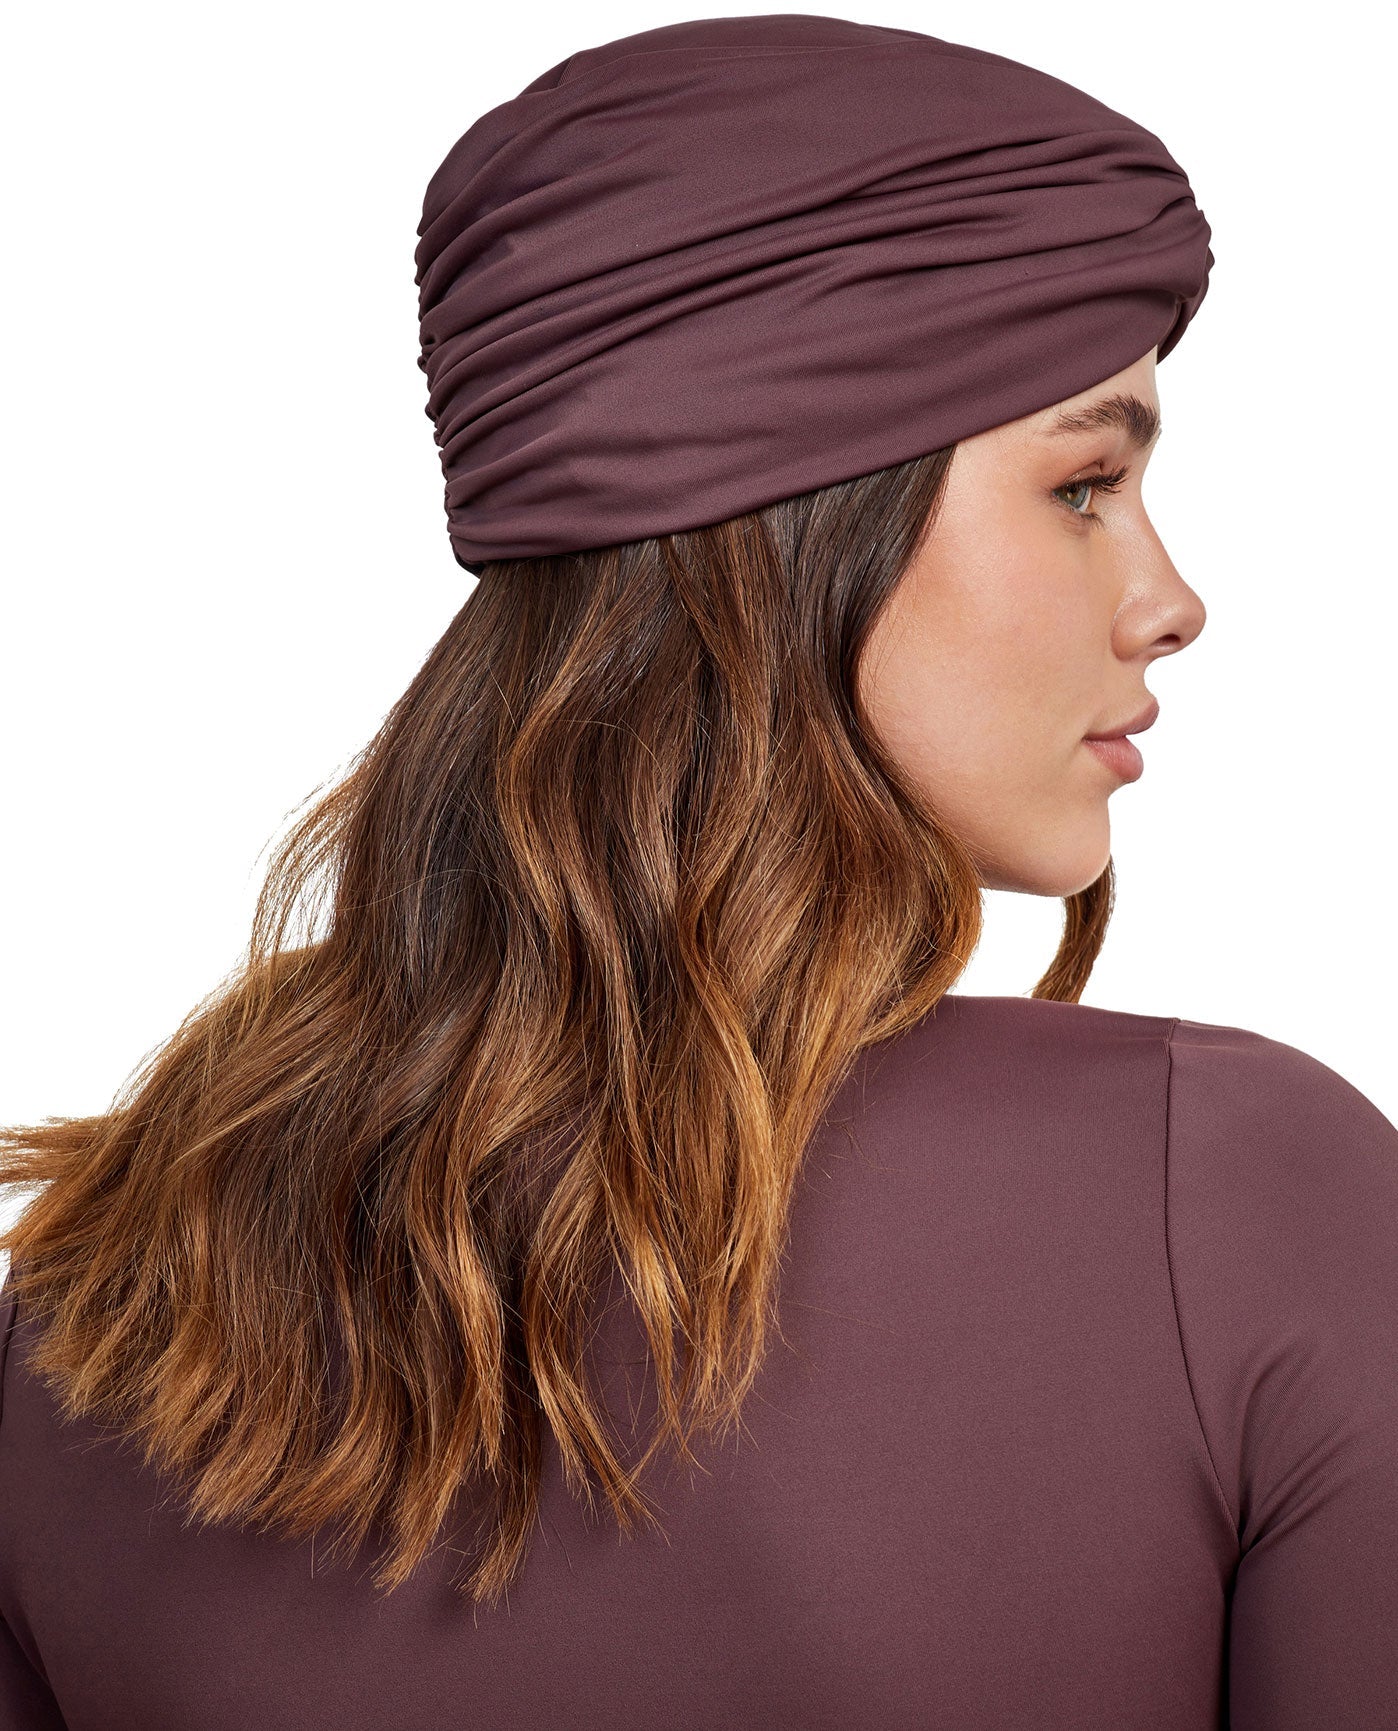 Back View Of Gottex Modest Knotted Hair Covering | GOTTEX MODEST BROWN